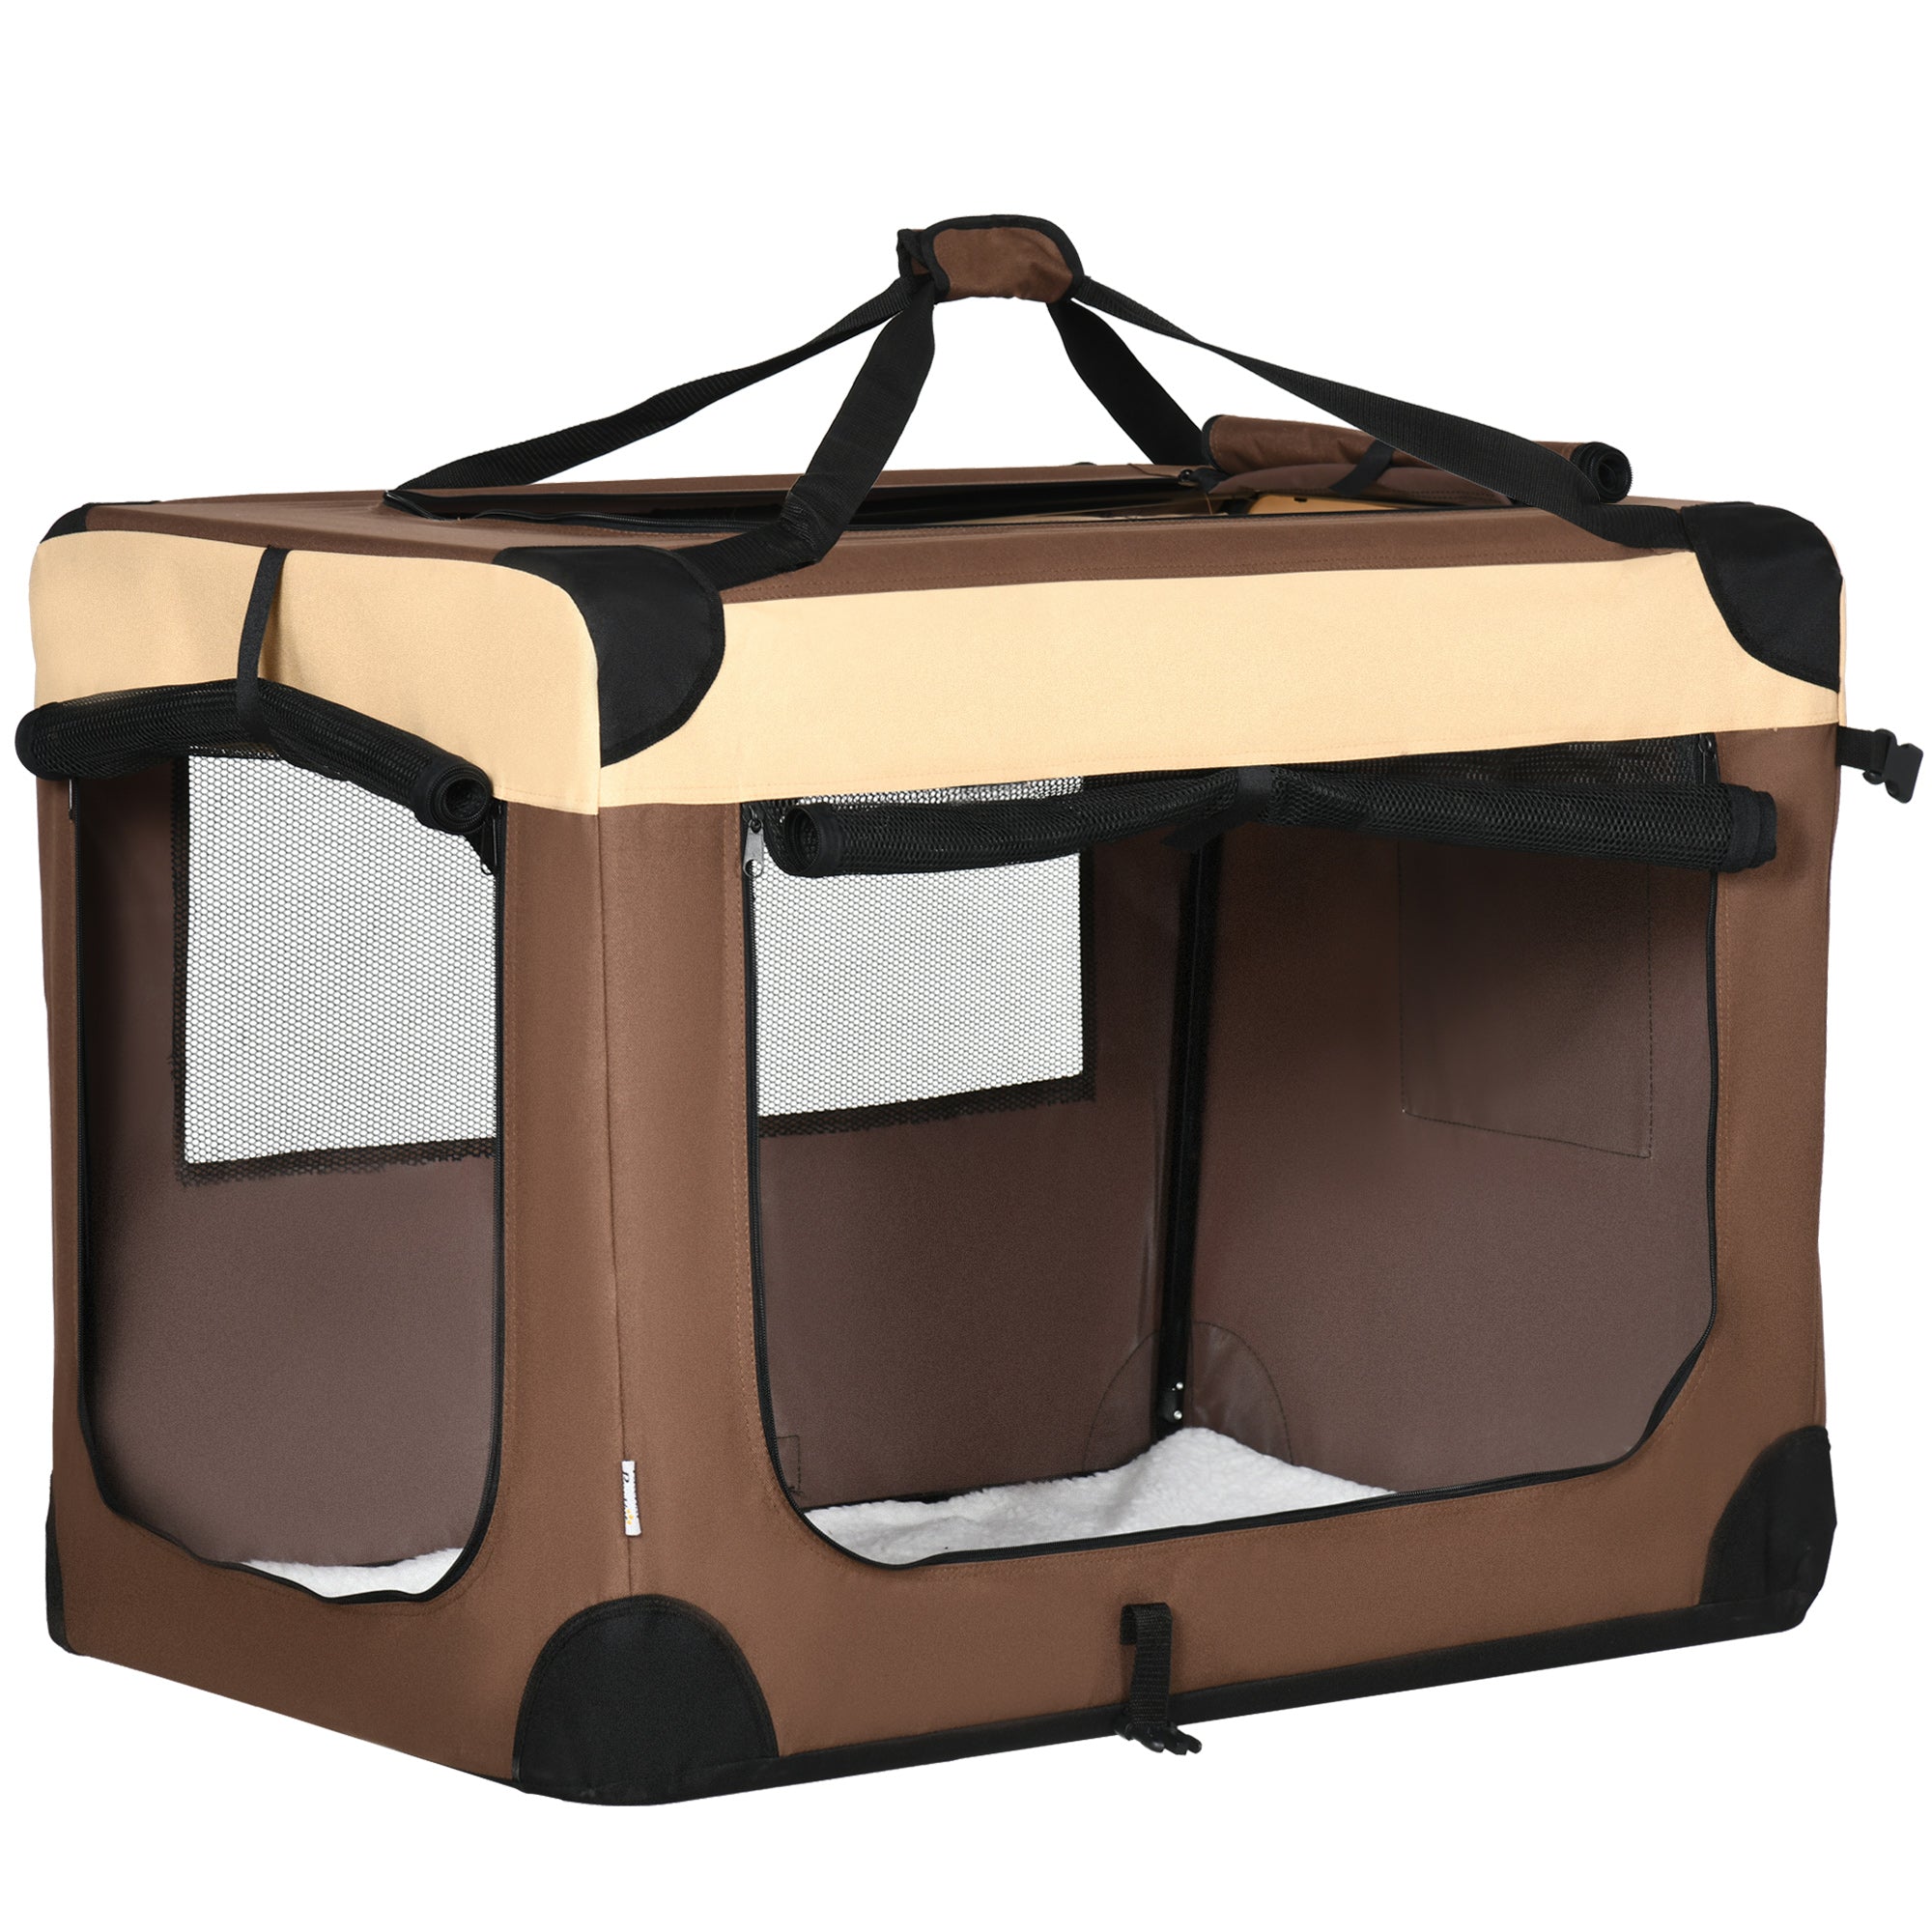 91cm Foldable Pet Carrier, with Cushion, for Medium Dogs and Cats, PawHut, Brown